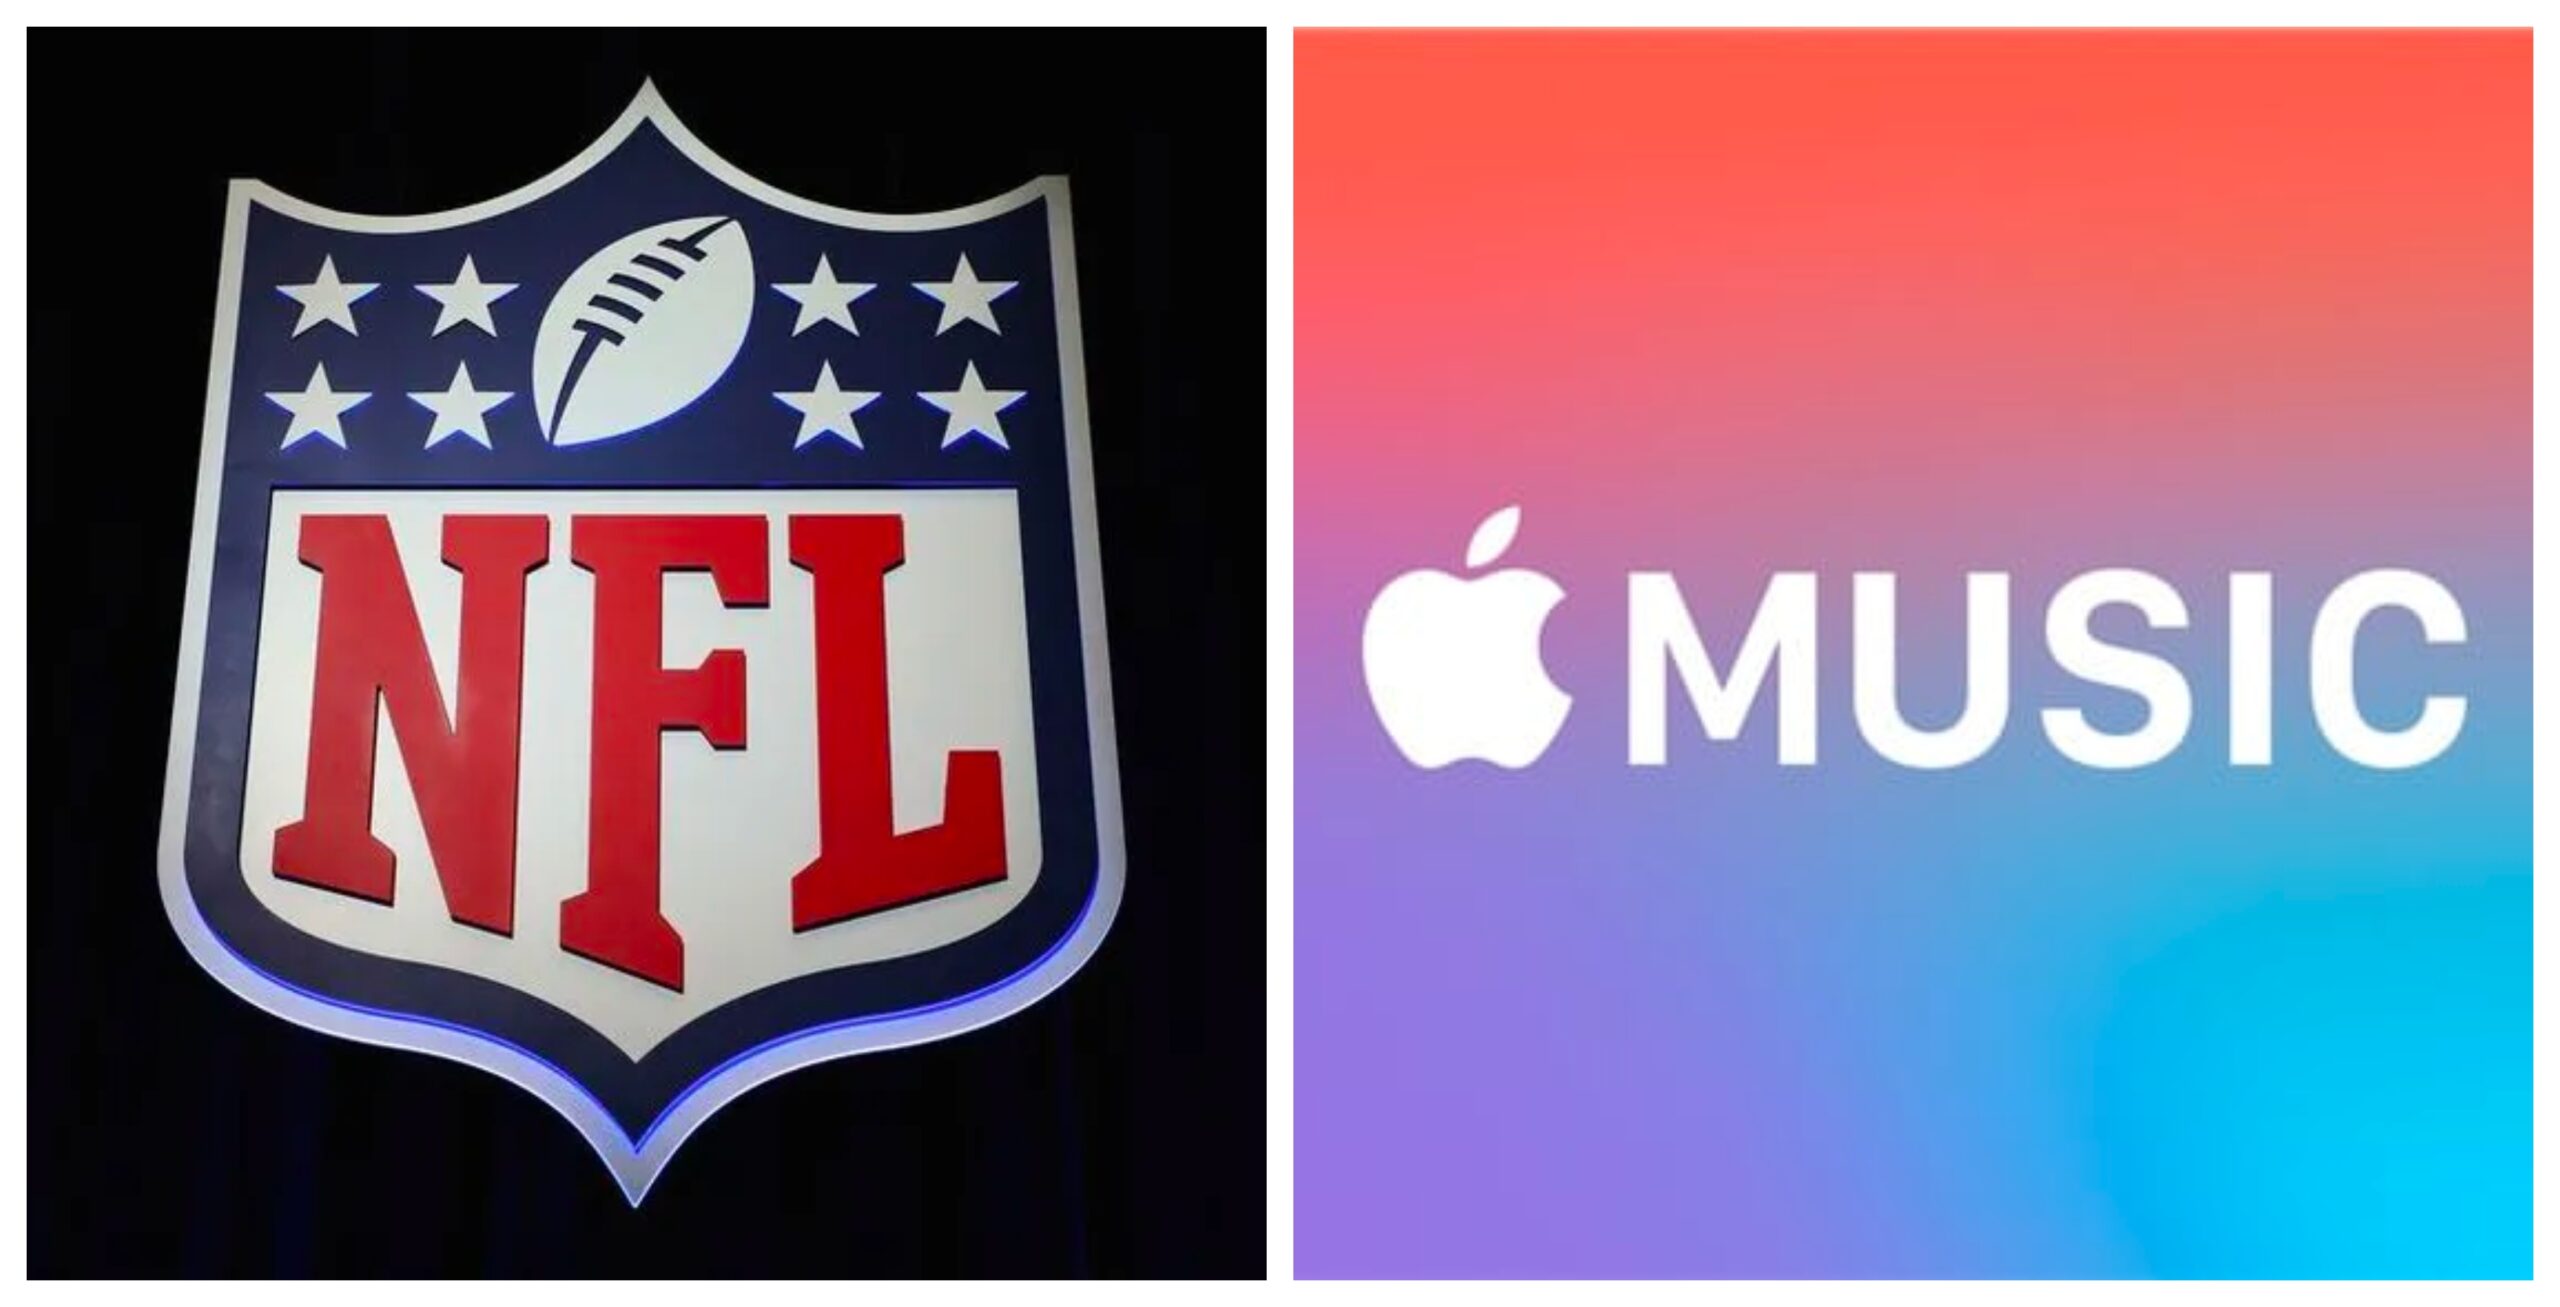 Apple Music to Replace Pepsi as Sponsor of NFL's Super Bowl Halftime Show -  WSJ